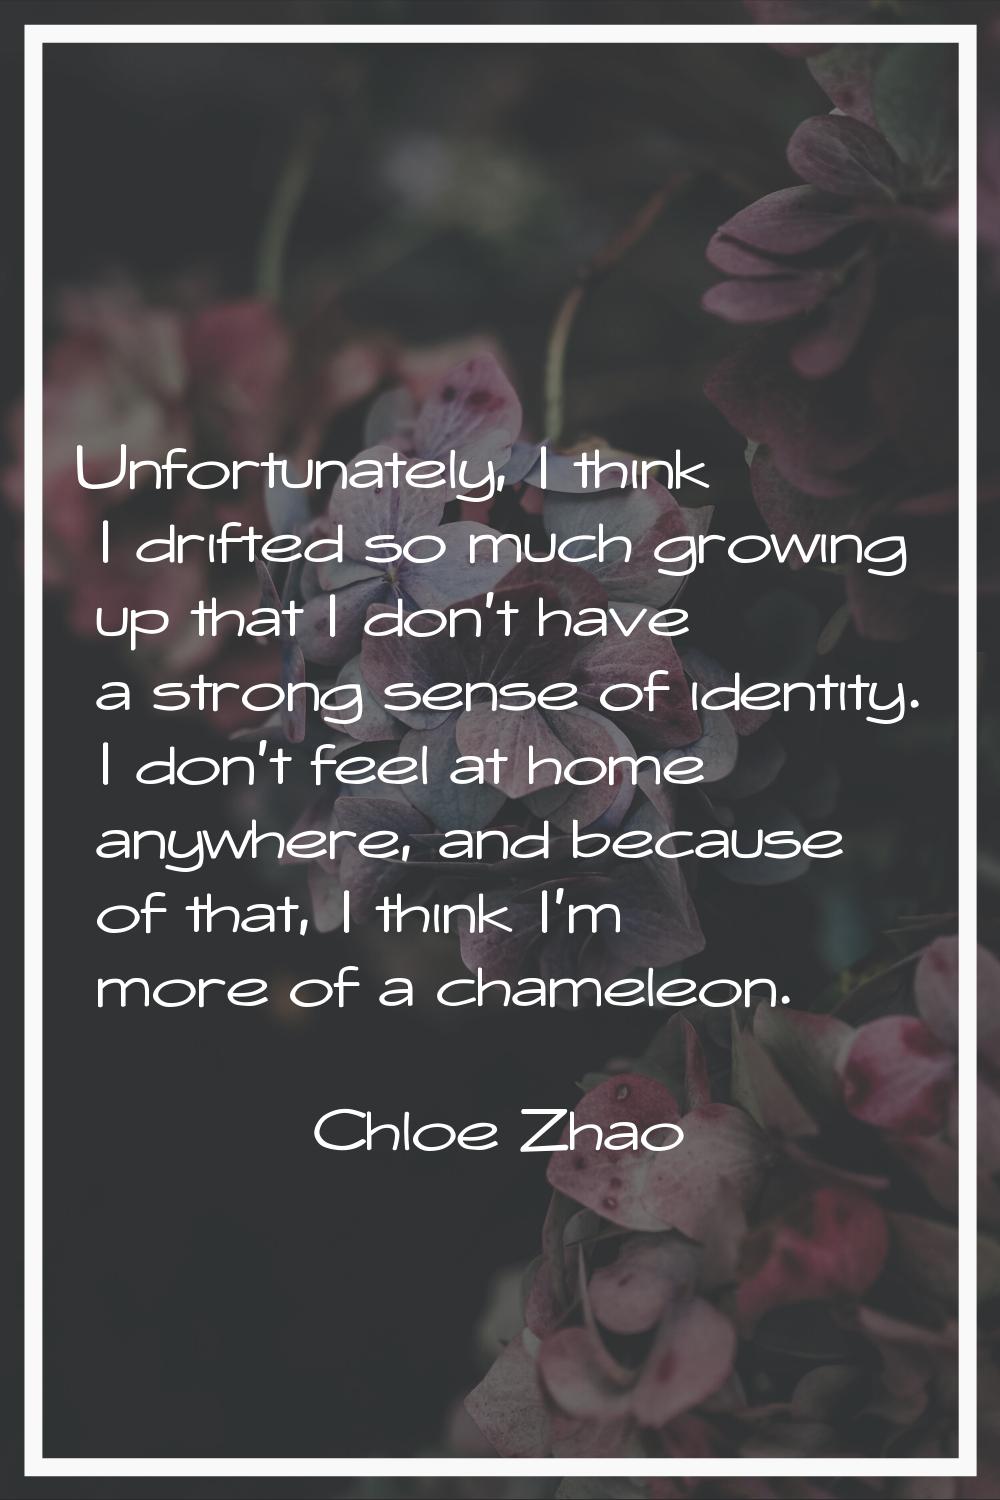 Unfortunately, I think I drifted so much growing up that I don't have a strong sense of identity. I